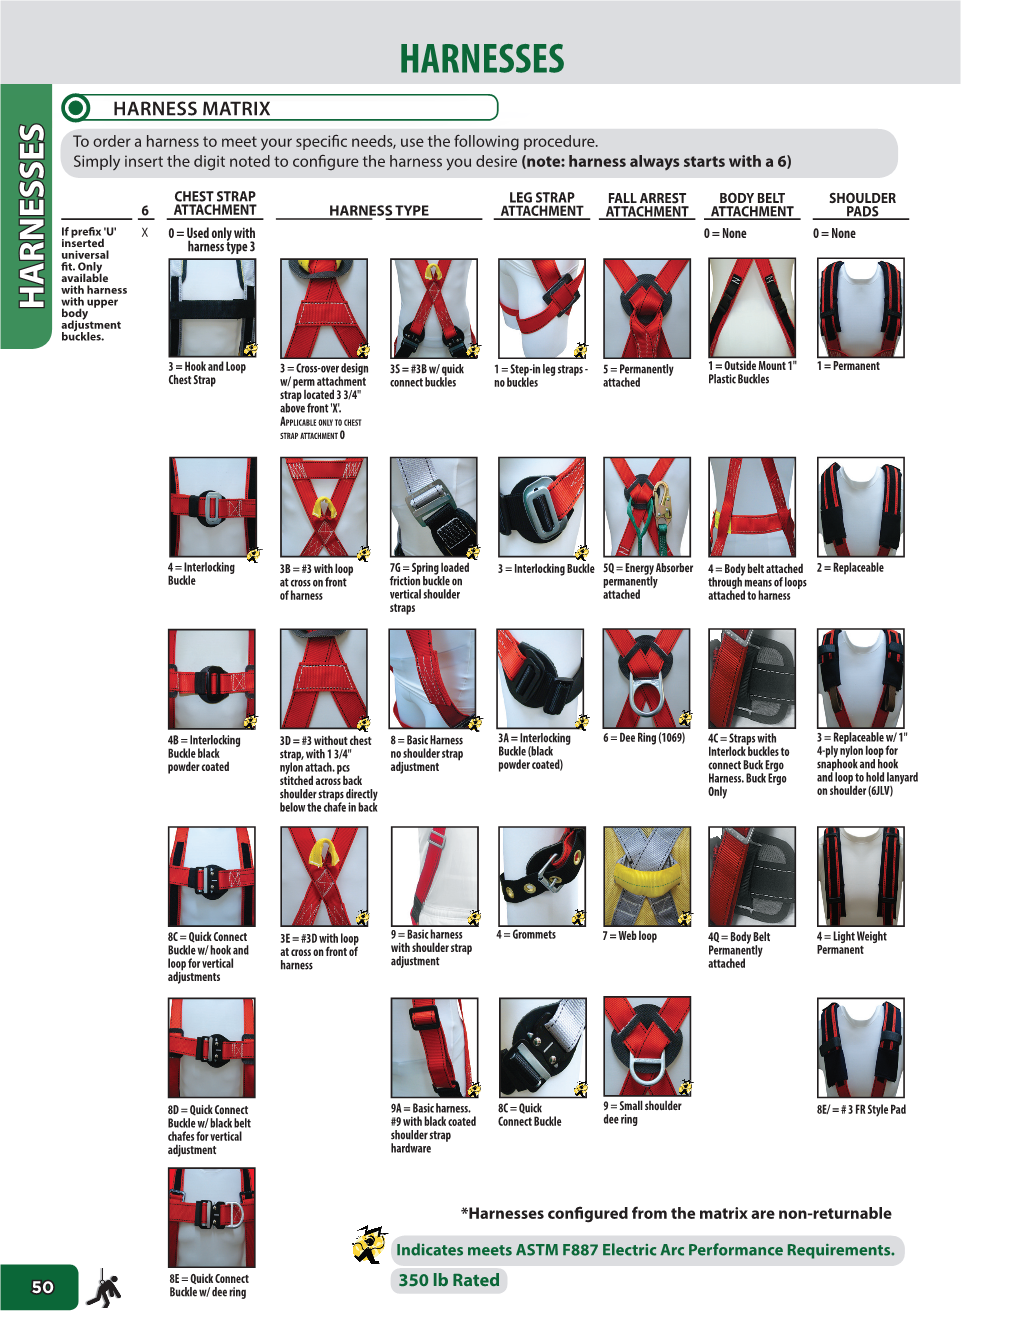 HARNESSES HARNESS MATRIX to Order a Harness to Meet Your Specific Needs, Use the Following Procedure